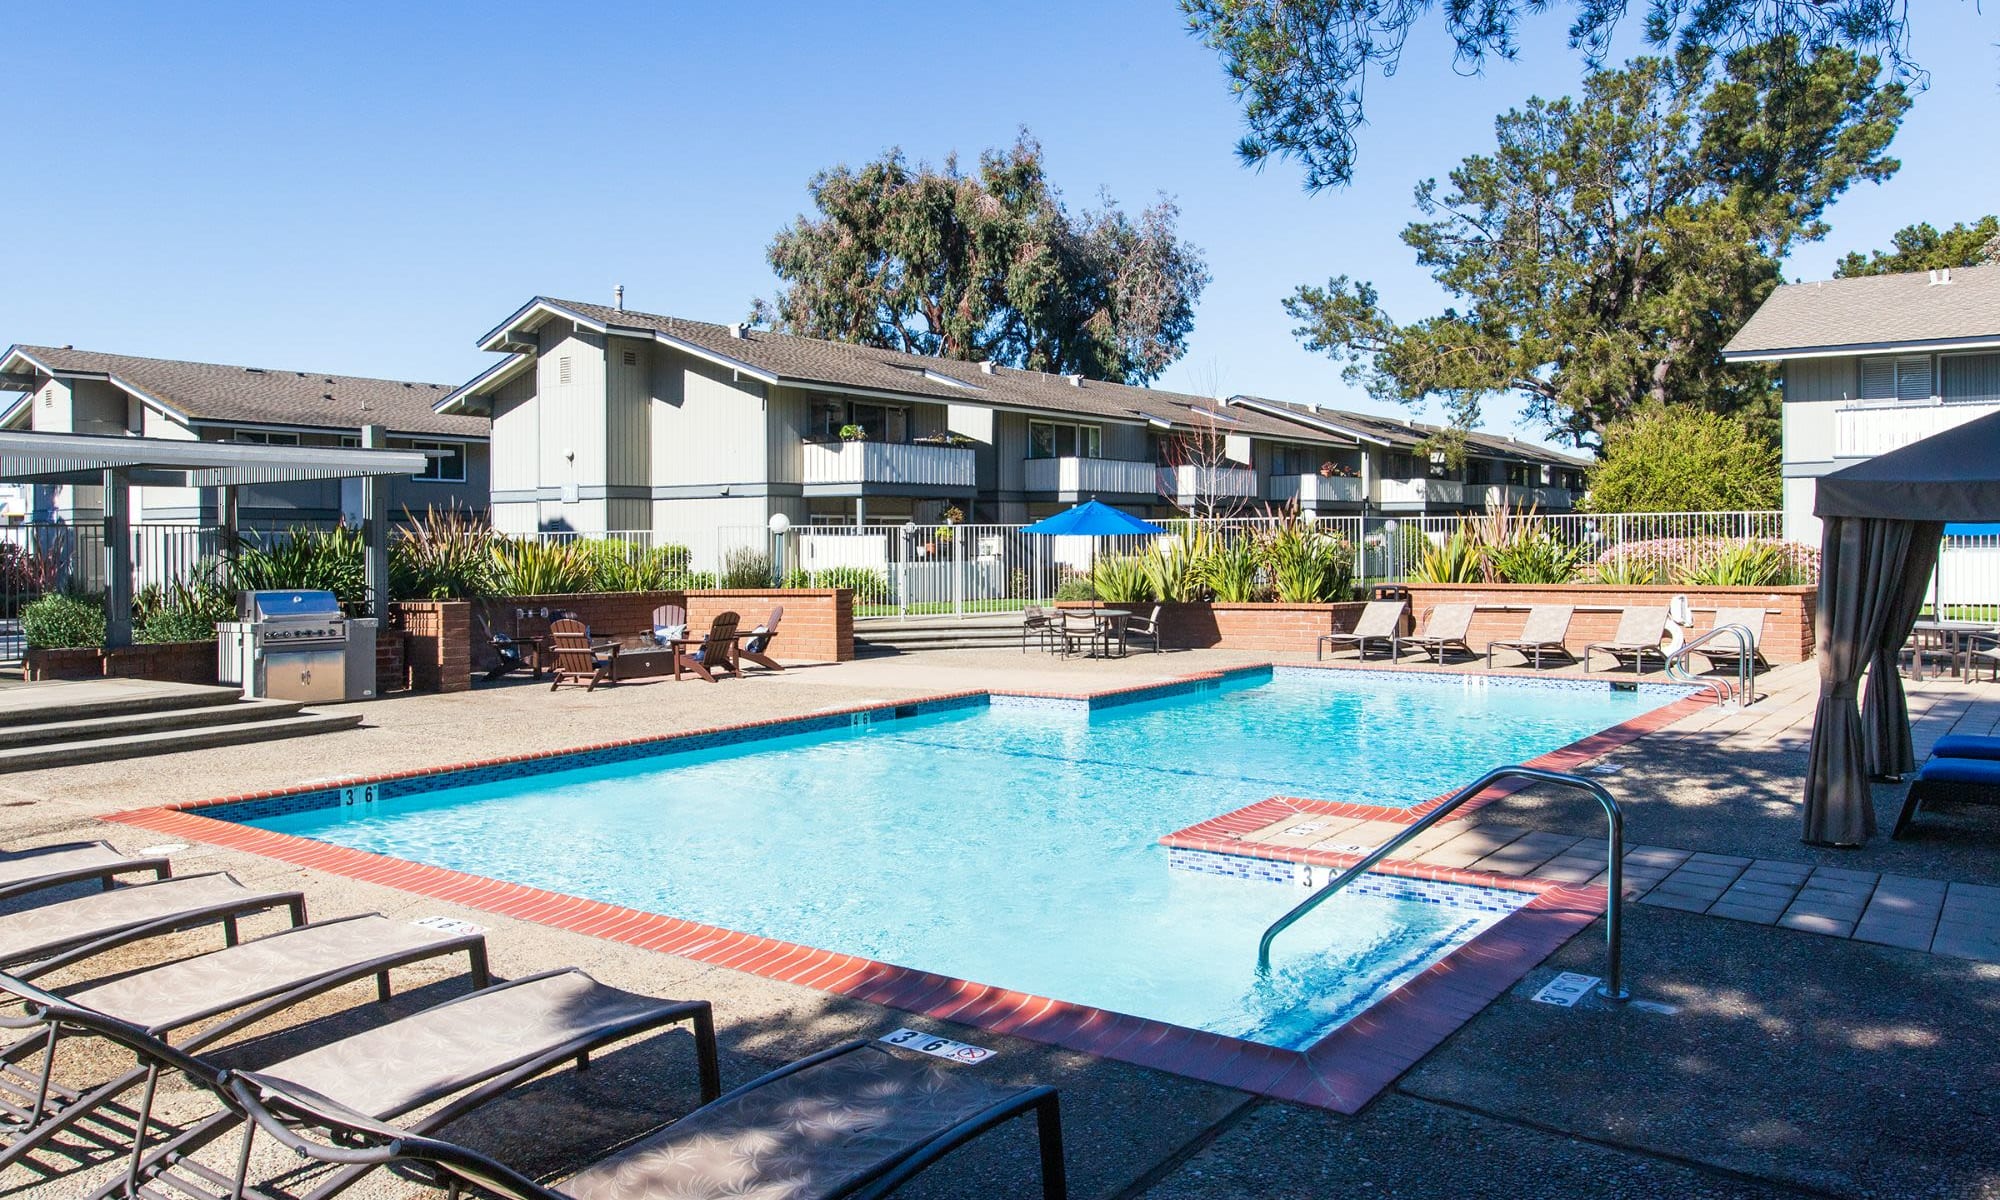 Swimming pool at Sand Cove in Foster City, California